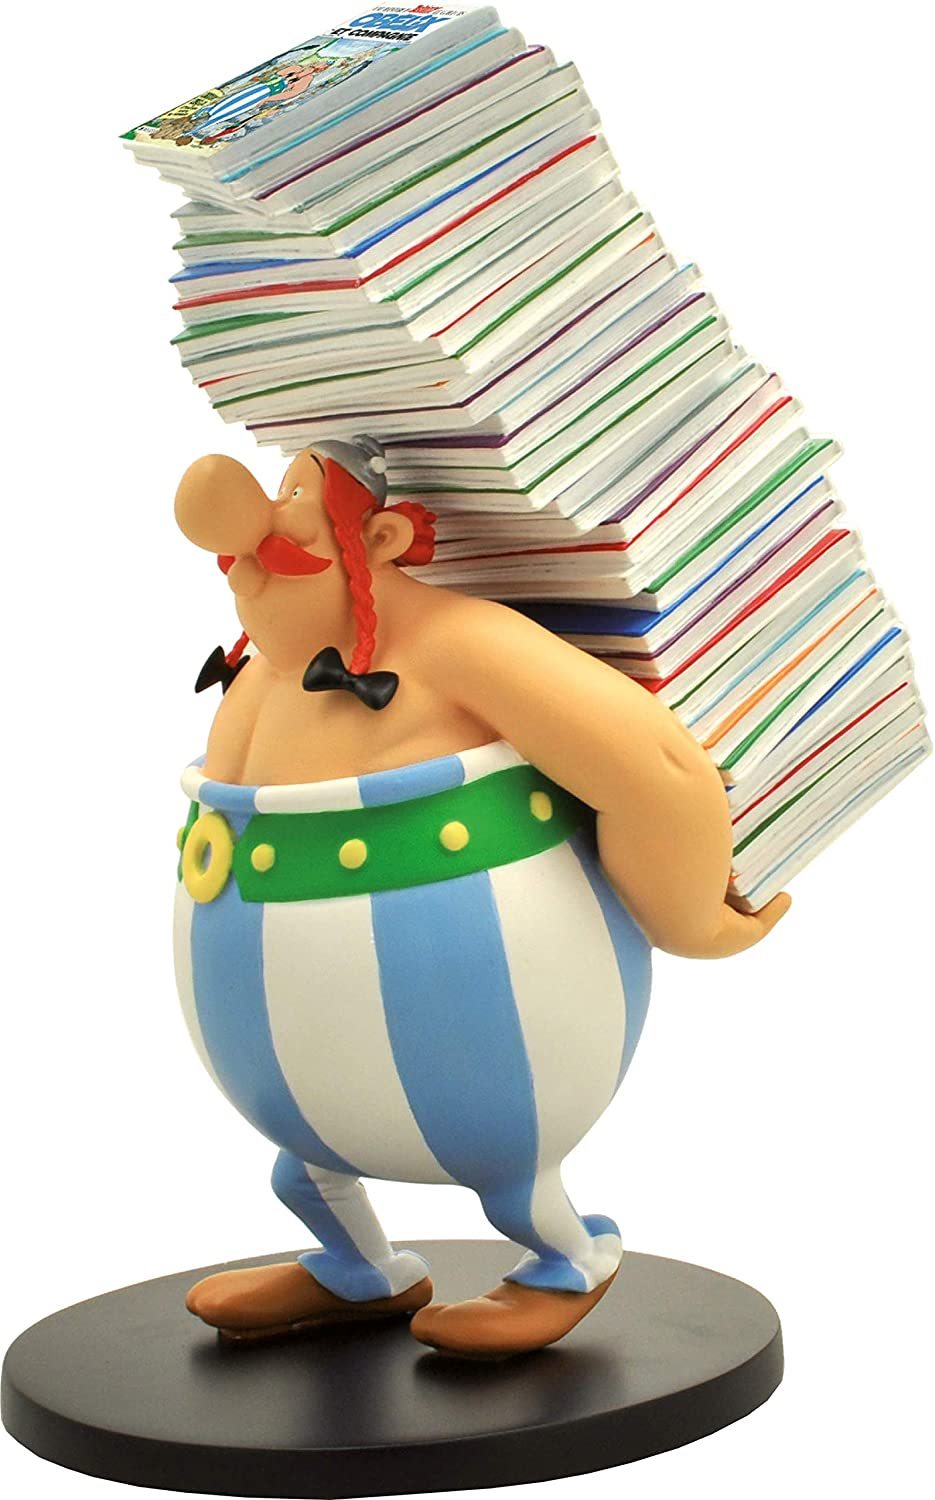 Obelix stack of comic book resin statue Asterix official product - $169.99